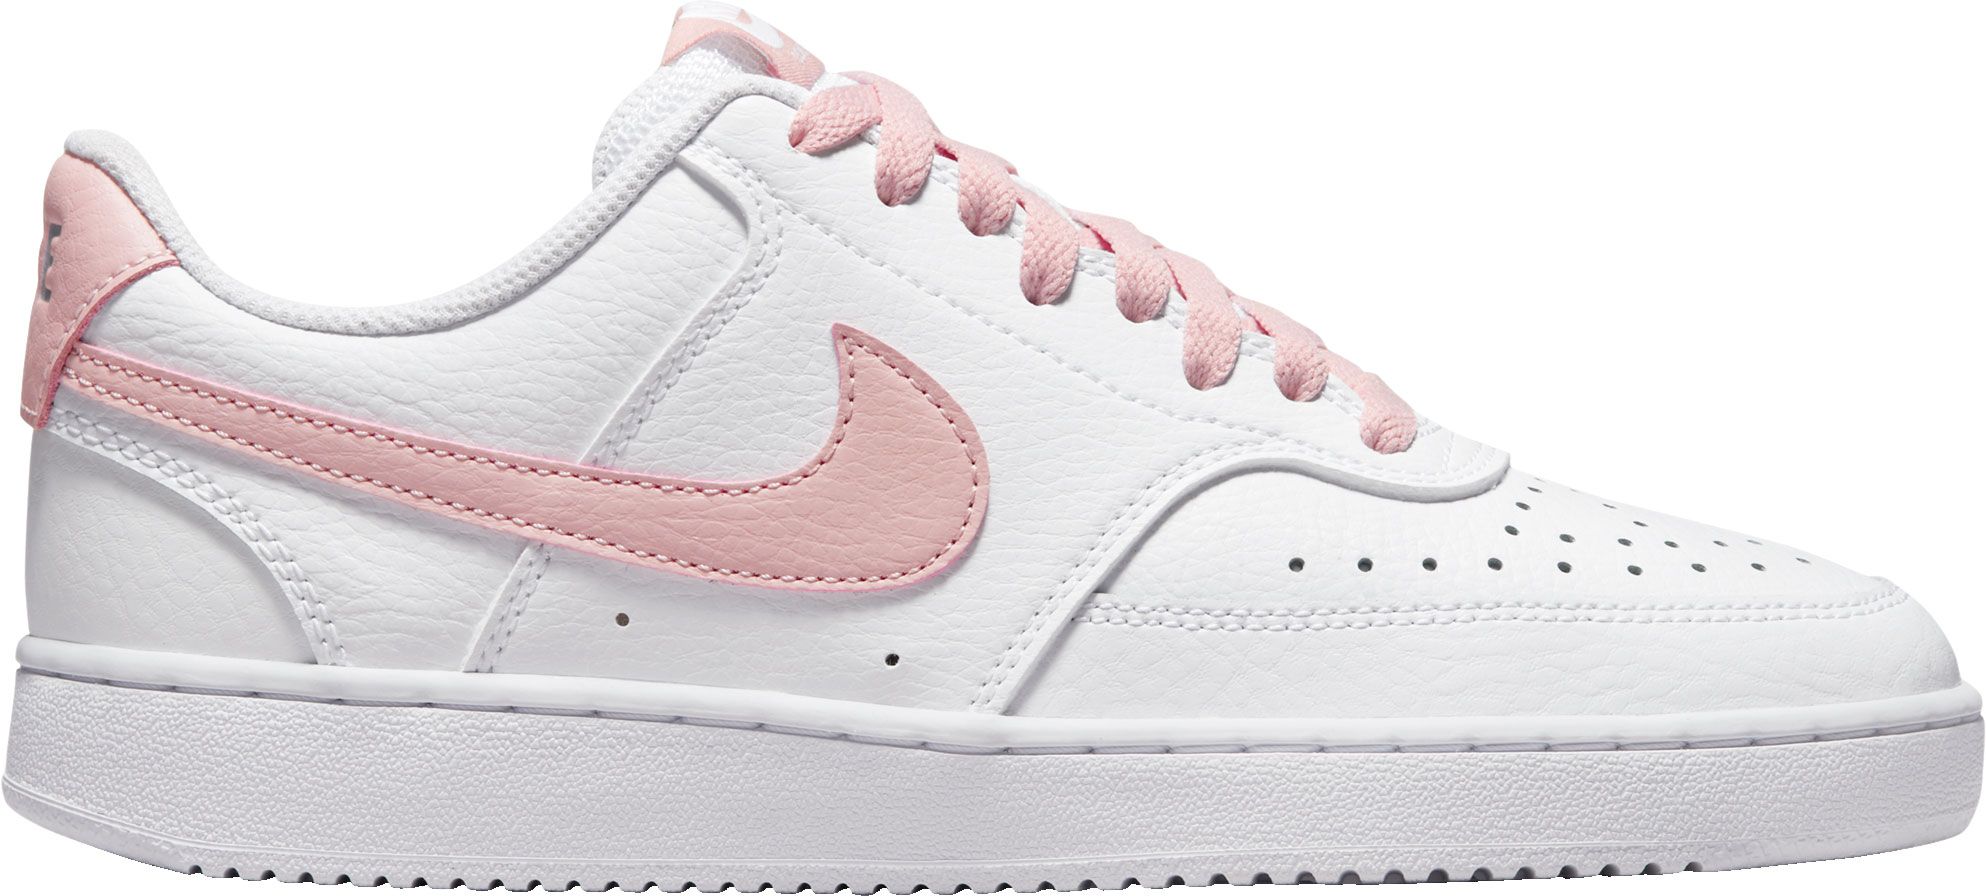 nike pink and white sneakers